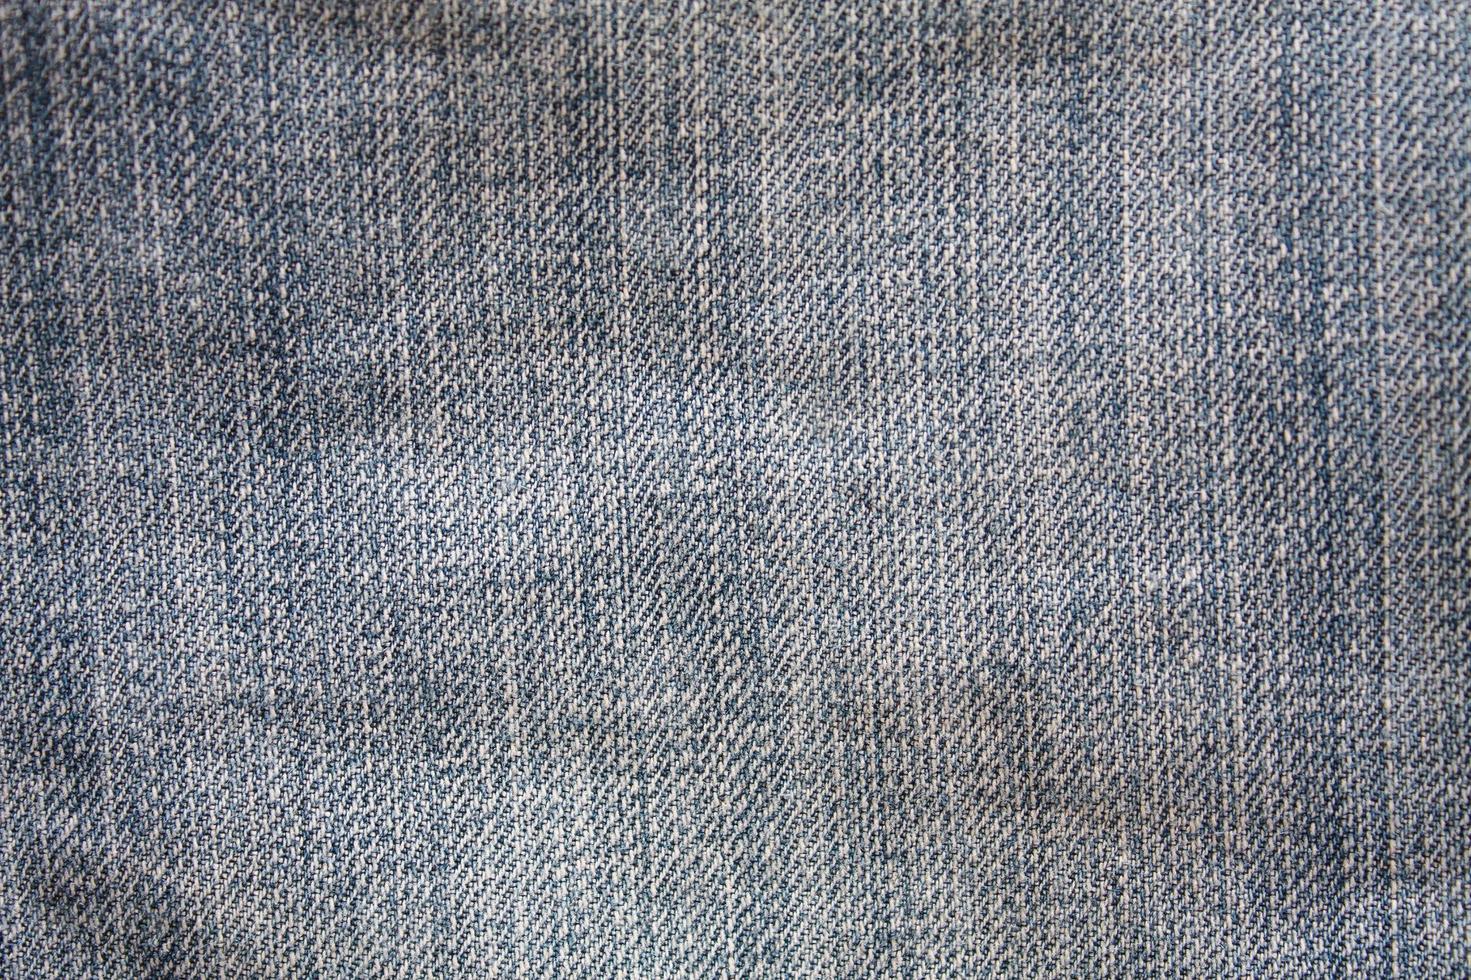 Texture of blue jeans background photo